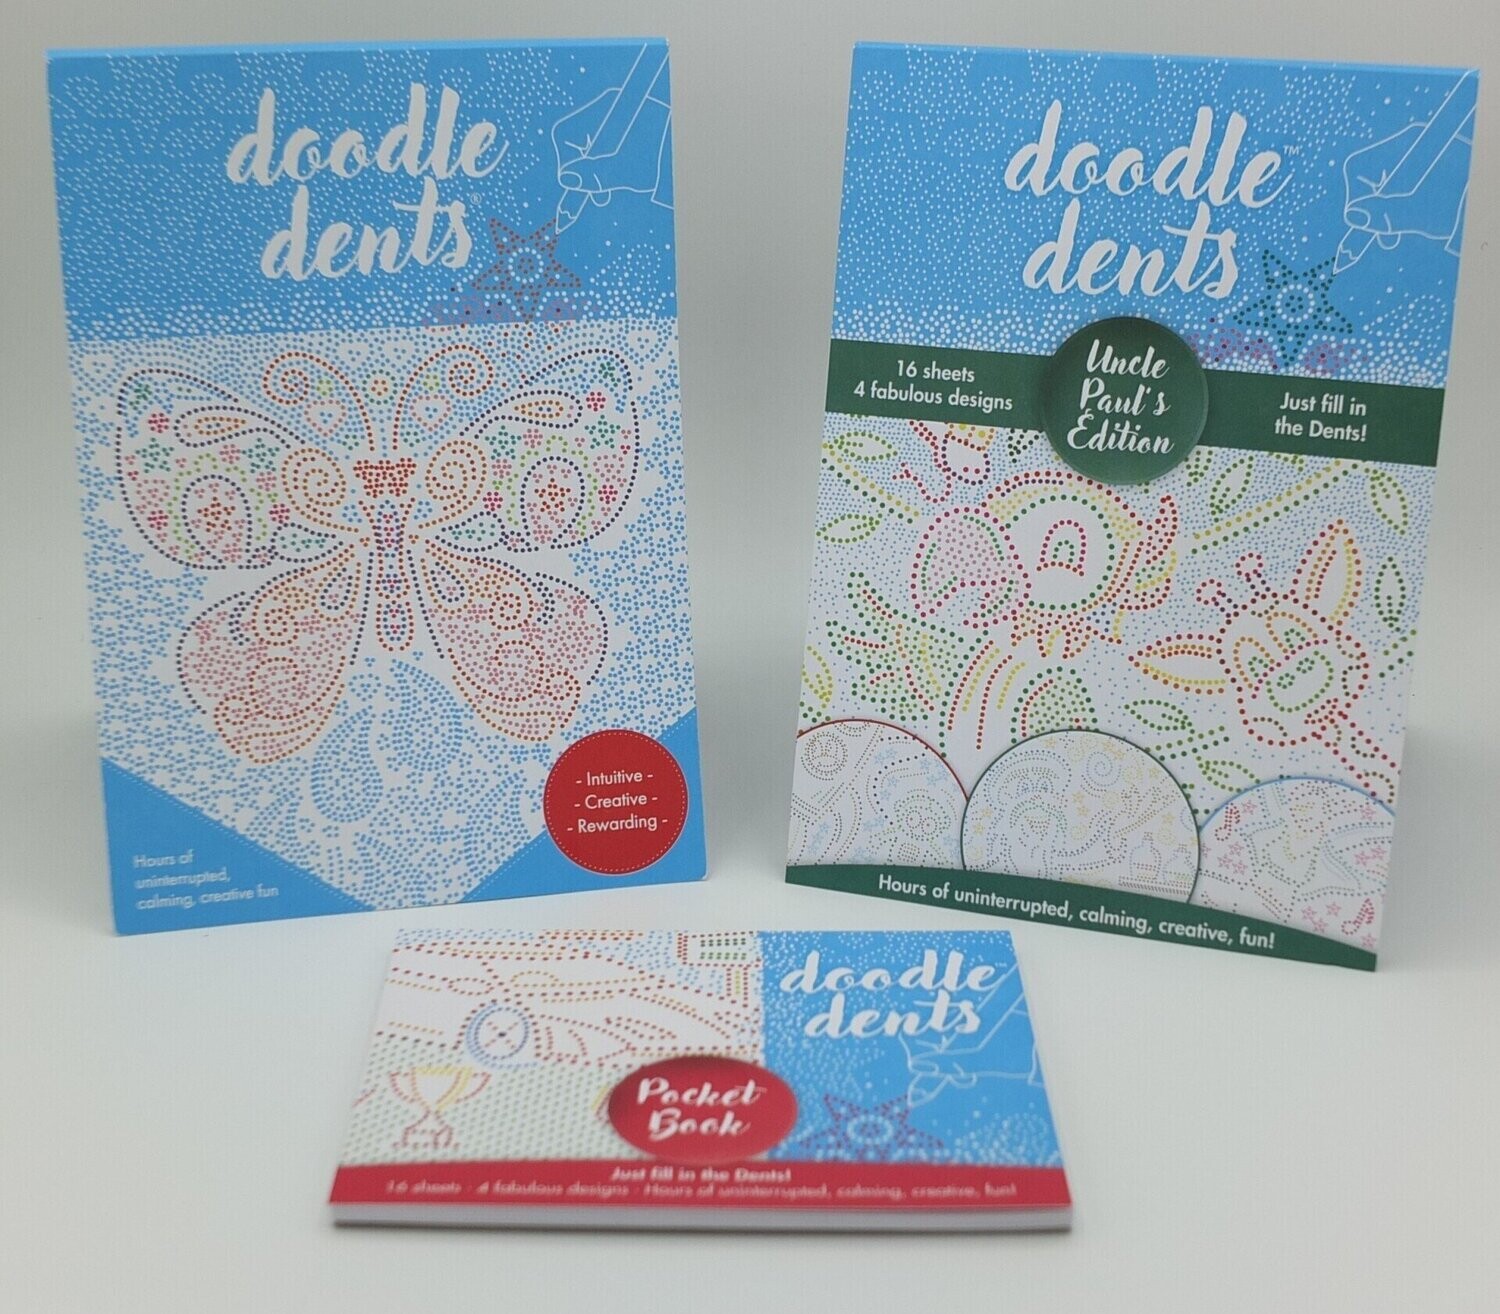 Triple Pack - all three booklets: the Original, Uncle Paul's, plus Granny & Grandpa's editions